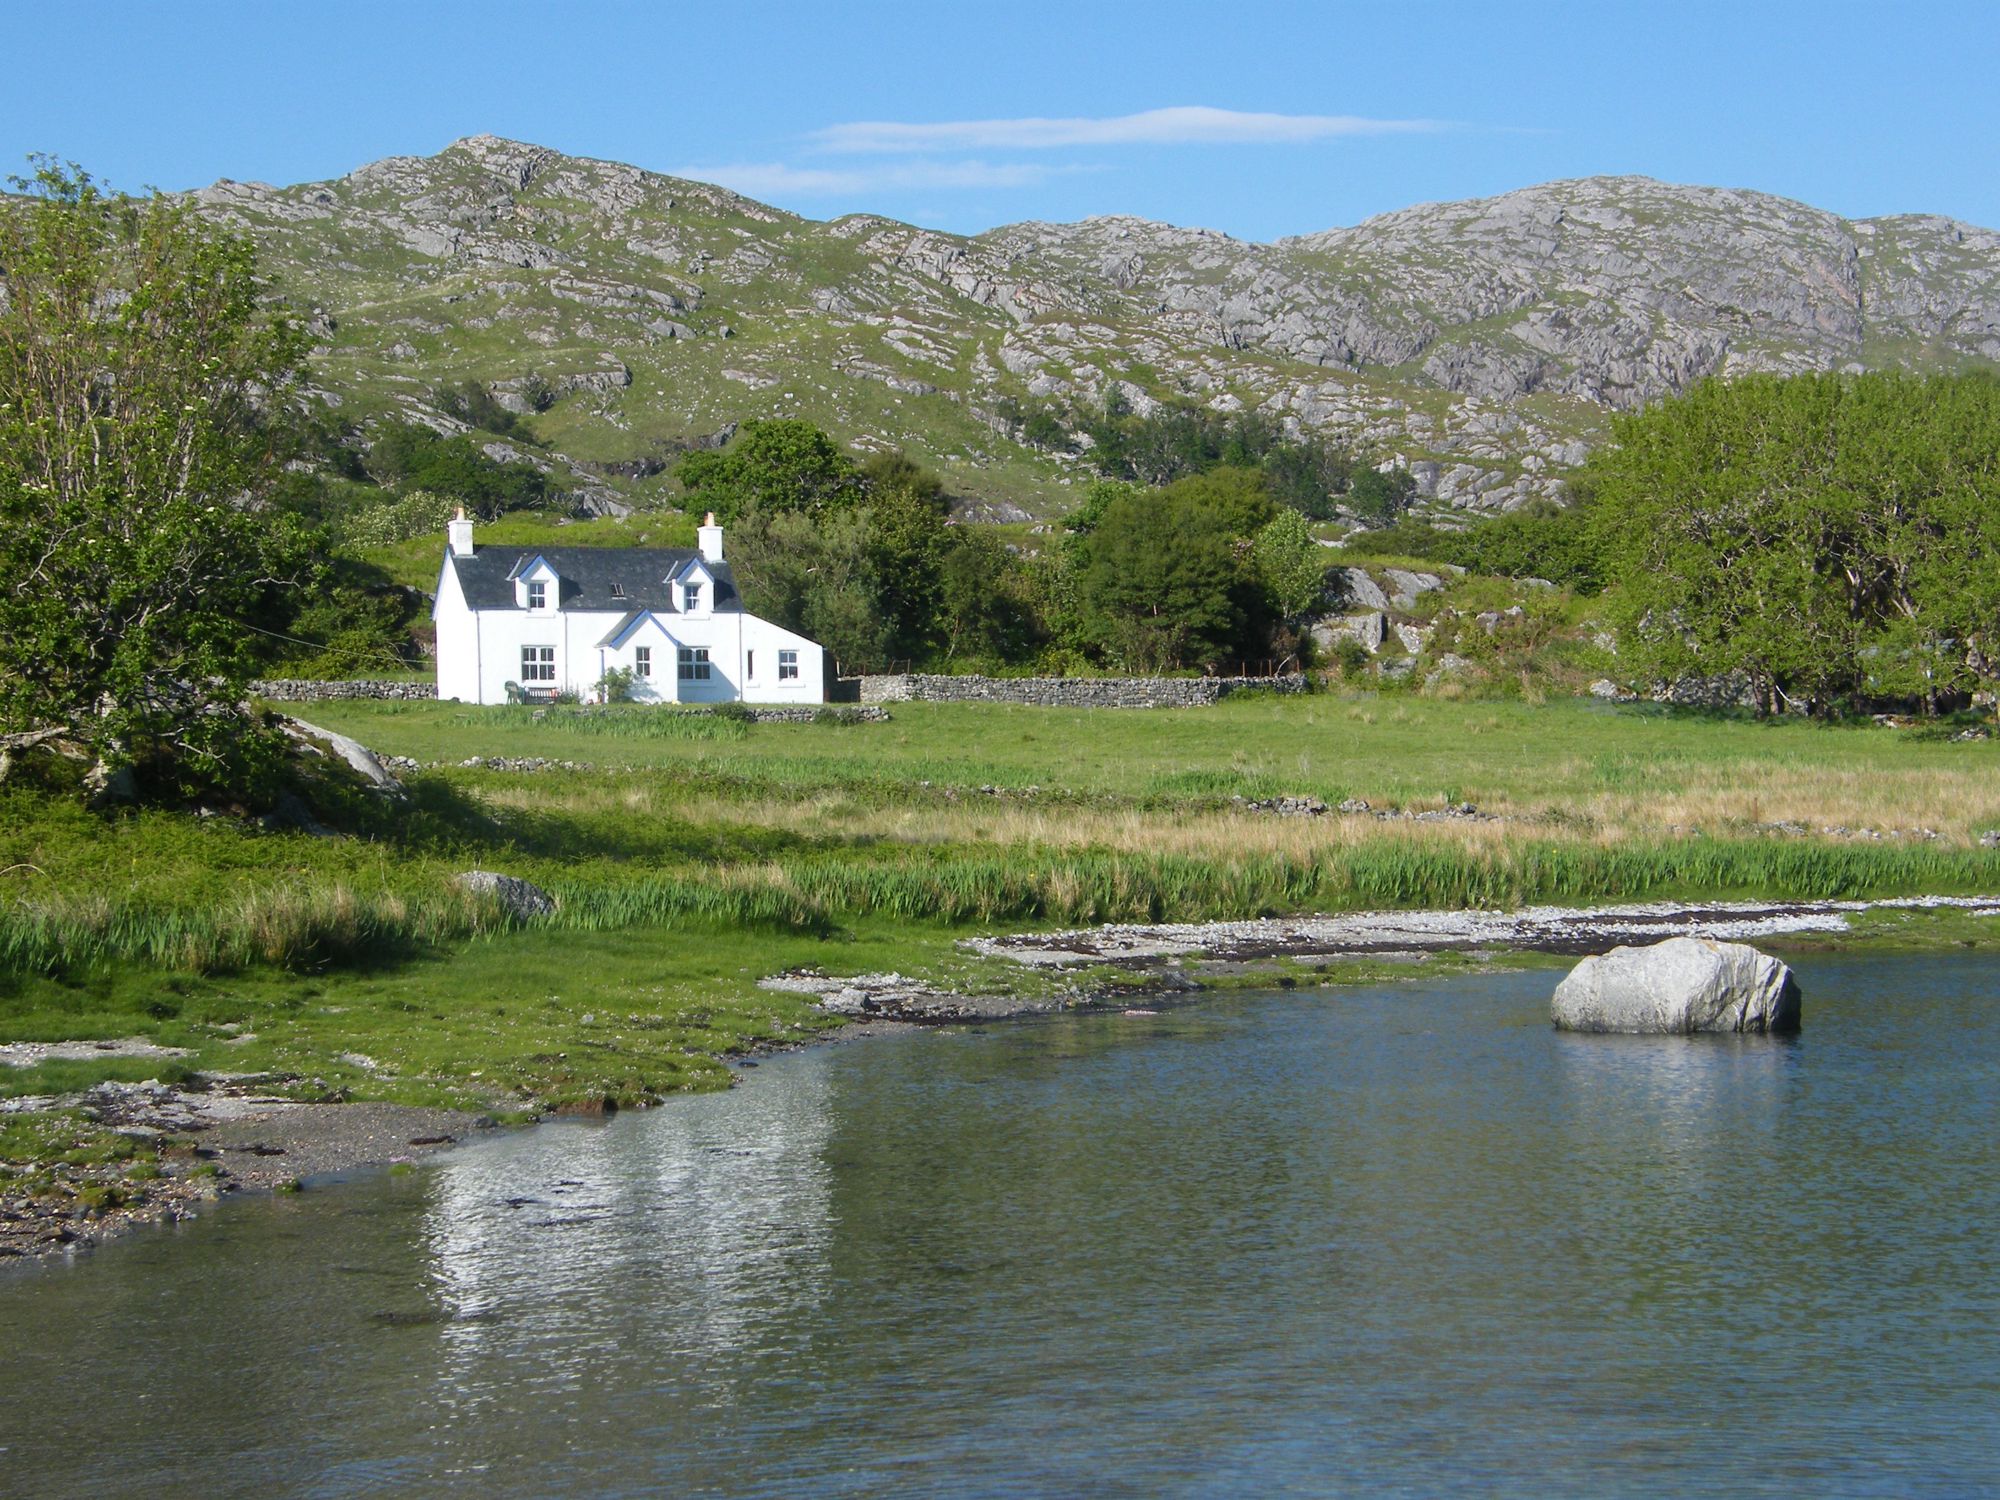 Remote UK Cottages - best off-the-beaten-track holiday cottages - Cool Places to Stay in the UK